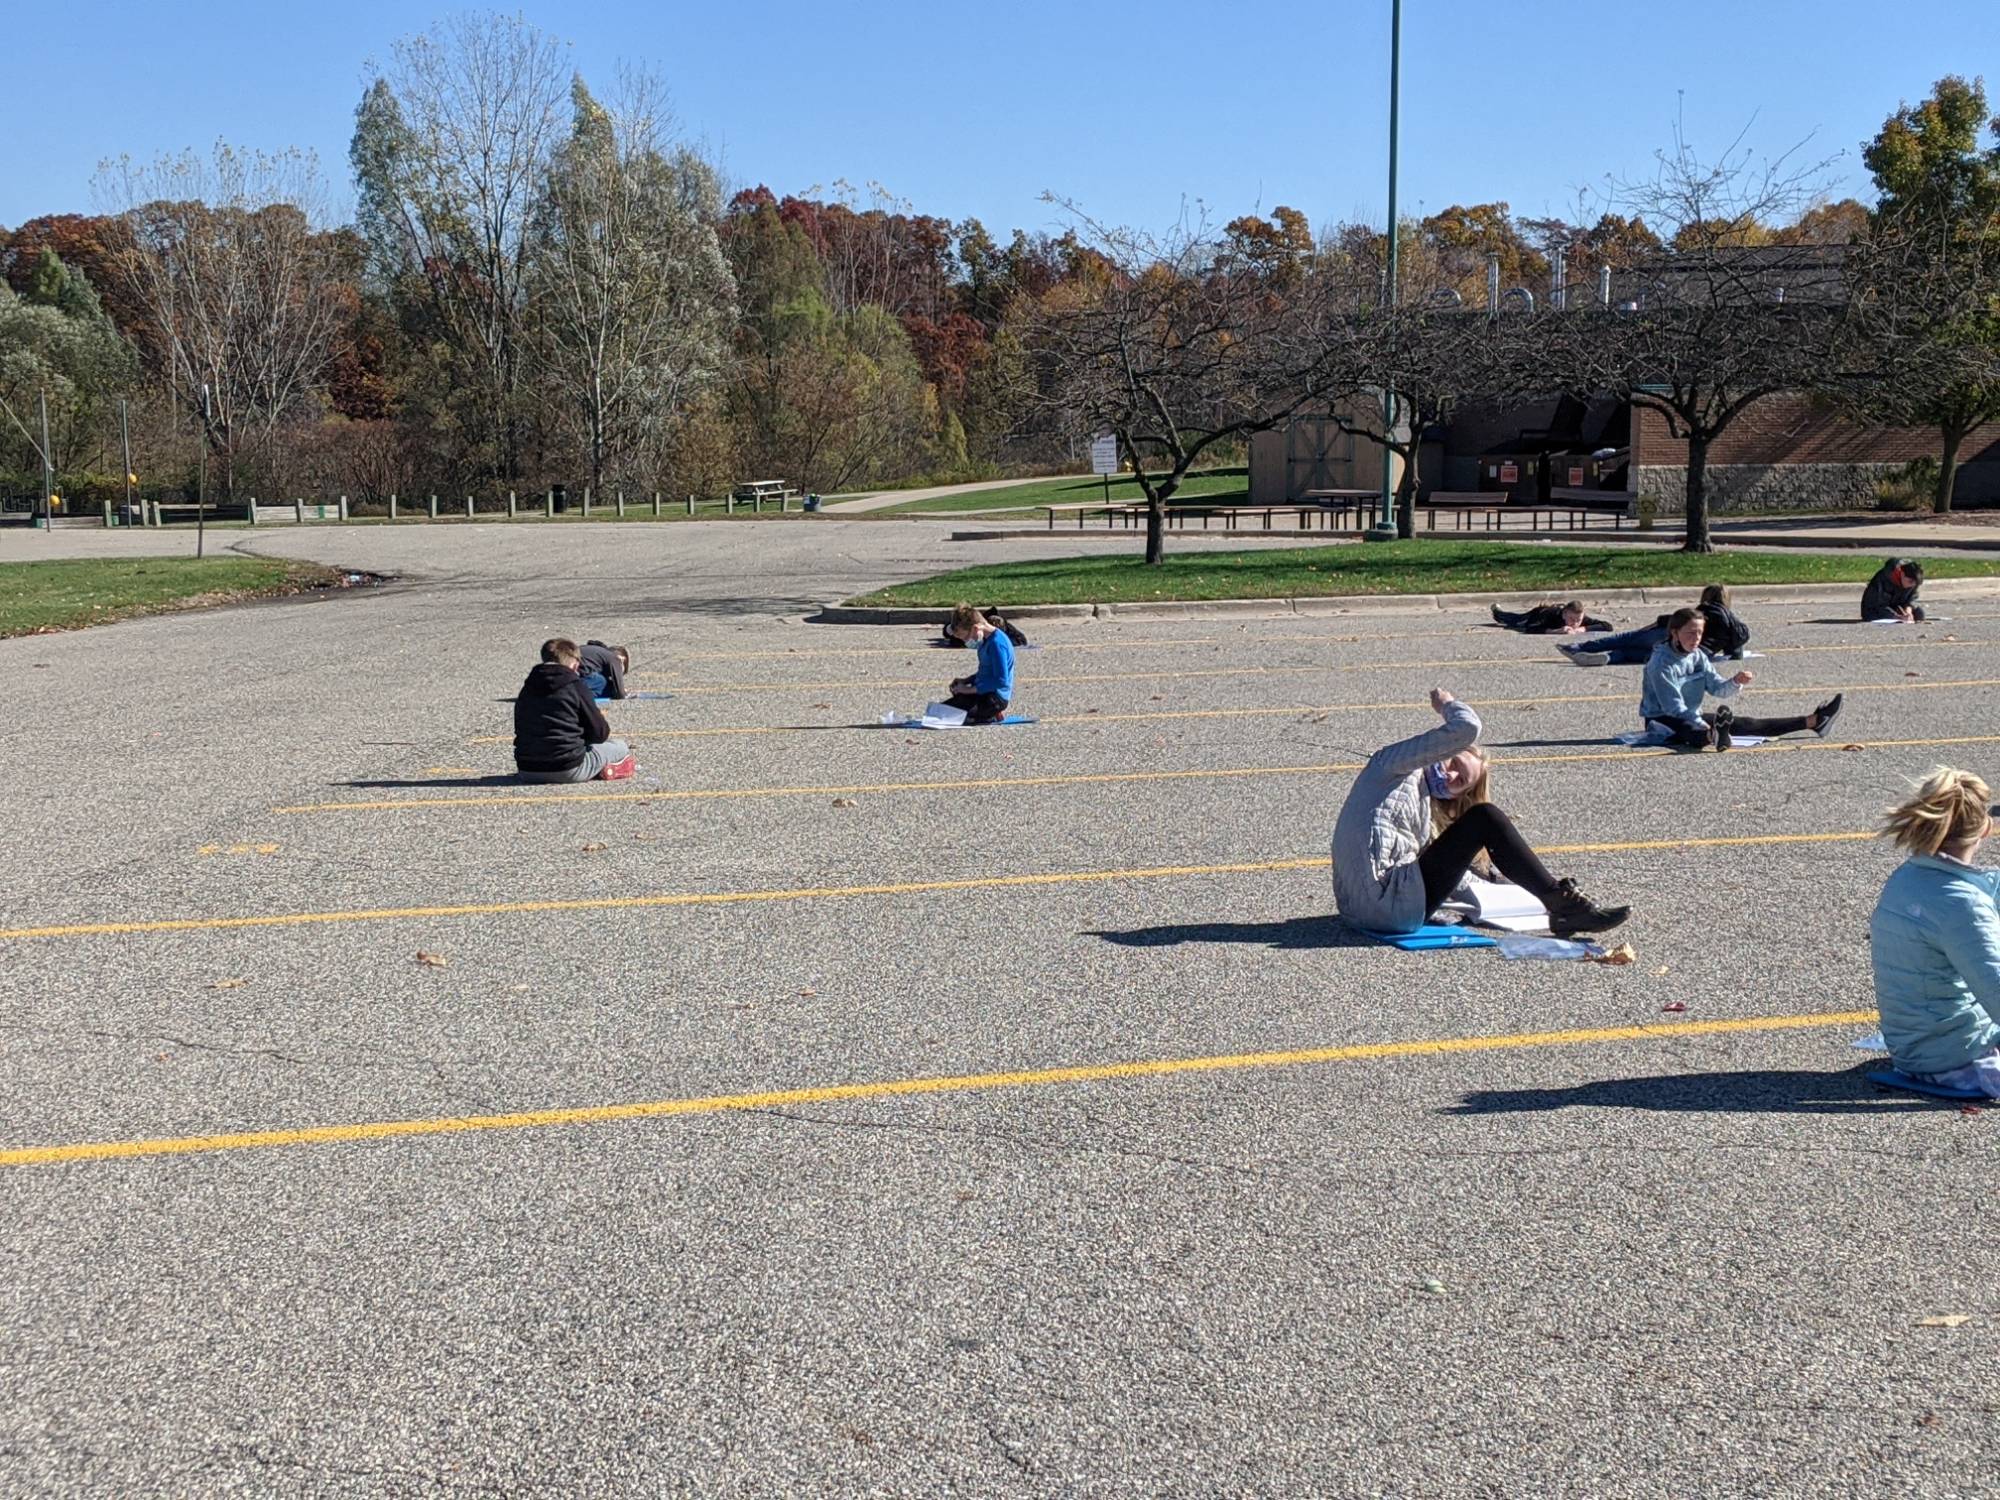 Students sitting on ground in parking lot